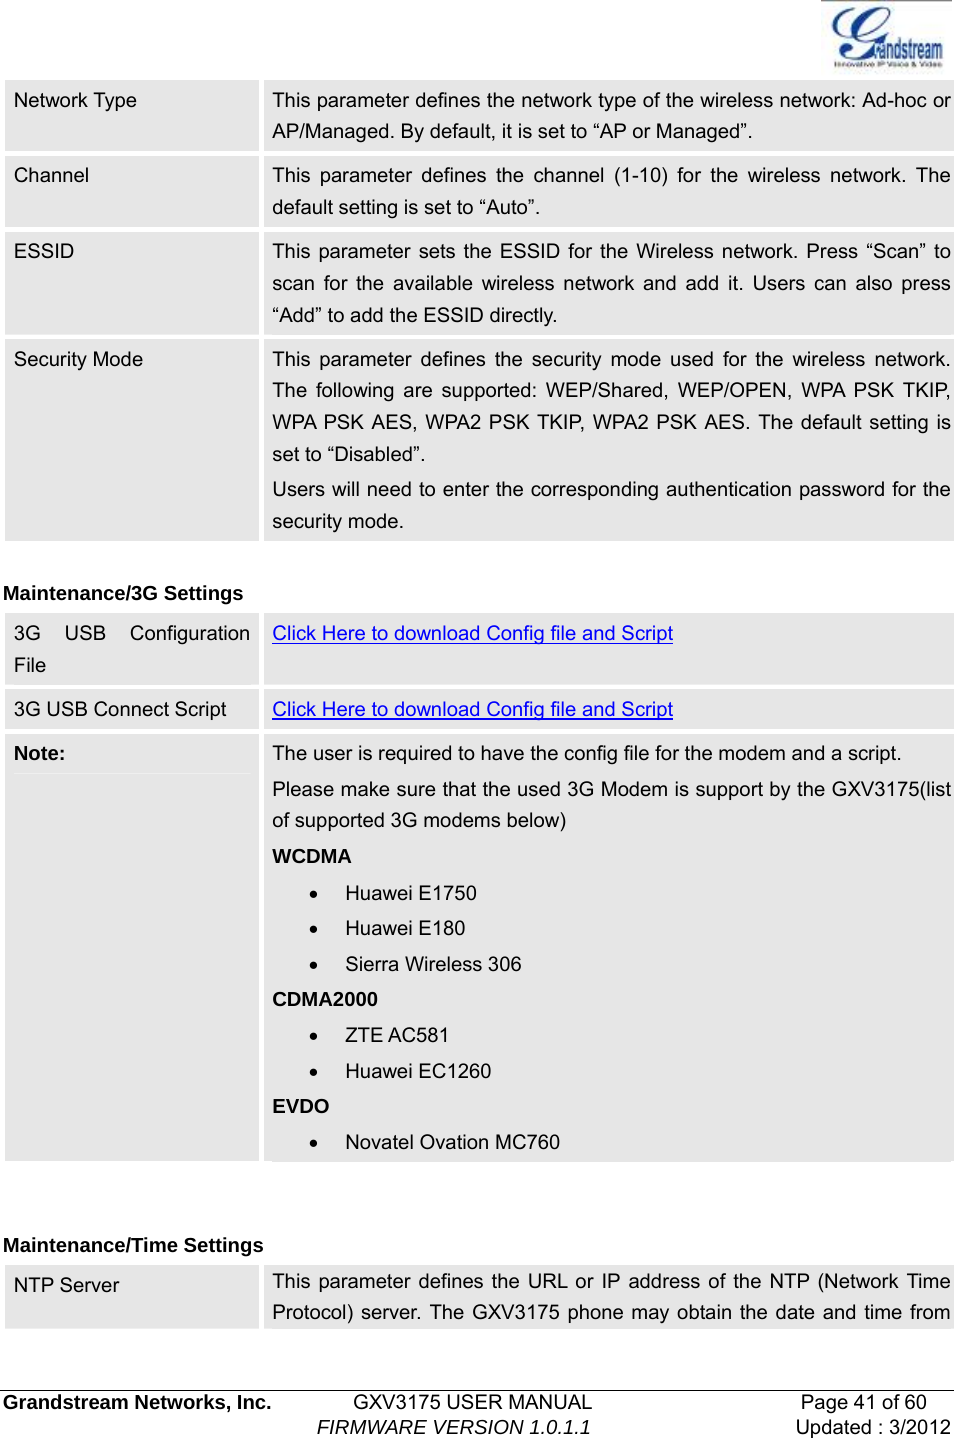   Grandstream Networks, Inc.        GXV3175 USER MANUAL                     Page 41 of 60                                FIRMWARE VERSION 1.0.1.1 Updated : 3/2012  Network Type  This parameter defines the network type of the wireless network: Ad-hoc or AP/Managed. By default, it is set to “AP or Managed”.   Channel  This parameter defines the channel (1-10) for the wireless network. The default setting is set to “Auto”.   ESSID  This parameter sets the ESSID for the Wireless network. Press “Scan” to scan for the available wireless network and add it. Users can also press “Add” to add the ESSID directly.   Security Mode  This parameter defines the security mode used for the wireless network. The following are supported: WEP/Shared, WEP/OPEN, WPA PSK TKIP, WPA PSK AES, WPA2 PSK TKIP, WPA2 PSK AES. The default setting is set to “Disabled”.   Users will need to enter the corresponding authentication password for the security mode.    Maintenance/3G Settings 3G USB Configuration File Click Here to download Config file and Script 3G USB Connect Script  Click Here to download Config file and Script Note:  The user is required to have the config file for the modem and a script. Please make sure that the used 3G Modem is support by the GXV3175(list of supported 3G modems below) WCDMA • Huawei E1750 • Huawei E180 • Sierra Wireless 306 CDMA2000 • ZTE AC581 • Huawei EC1260 EVDO • Novatel Ovation MC760   Maintenance/Time Settings NTP Server  This parameter defines the URL or IP address of the NTP (Network Time Protocol) server. The GXV3175 phone may obtain the date and time from 